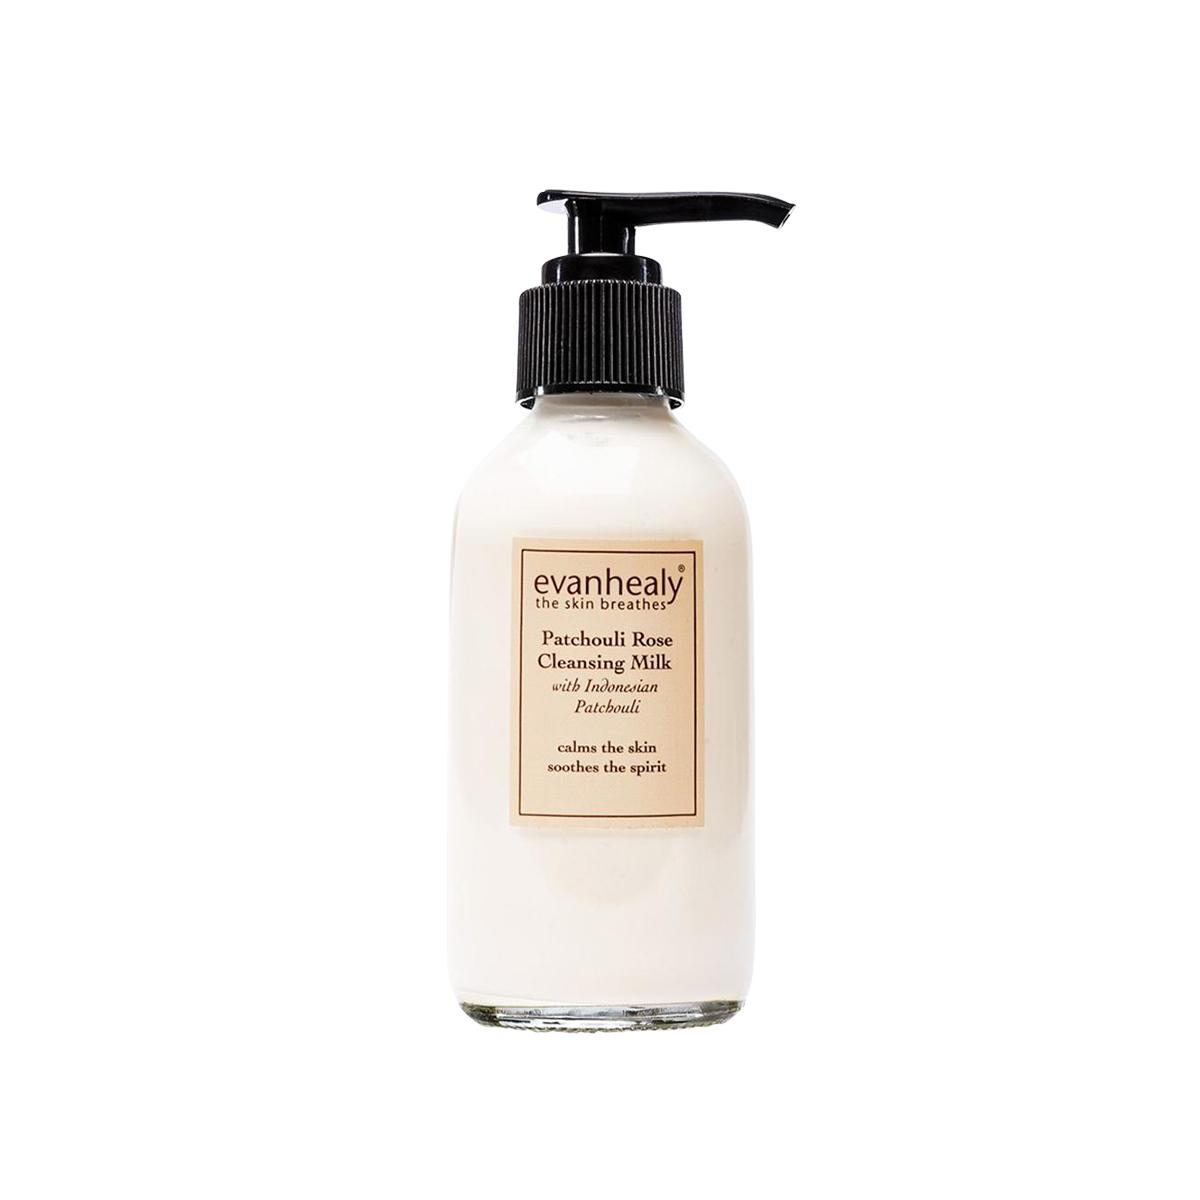 Primary image of Patchouli Rose Cleansing Milk